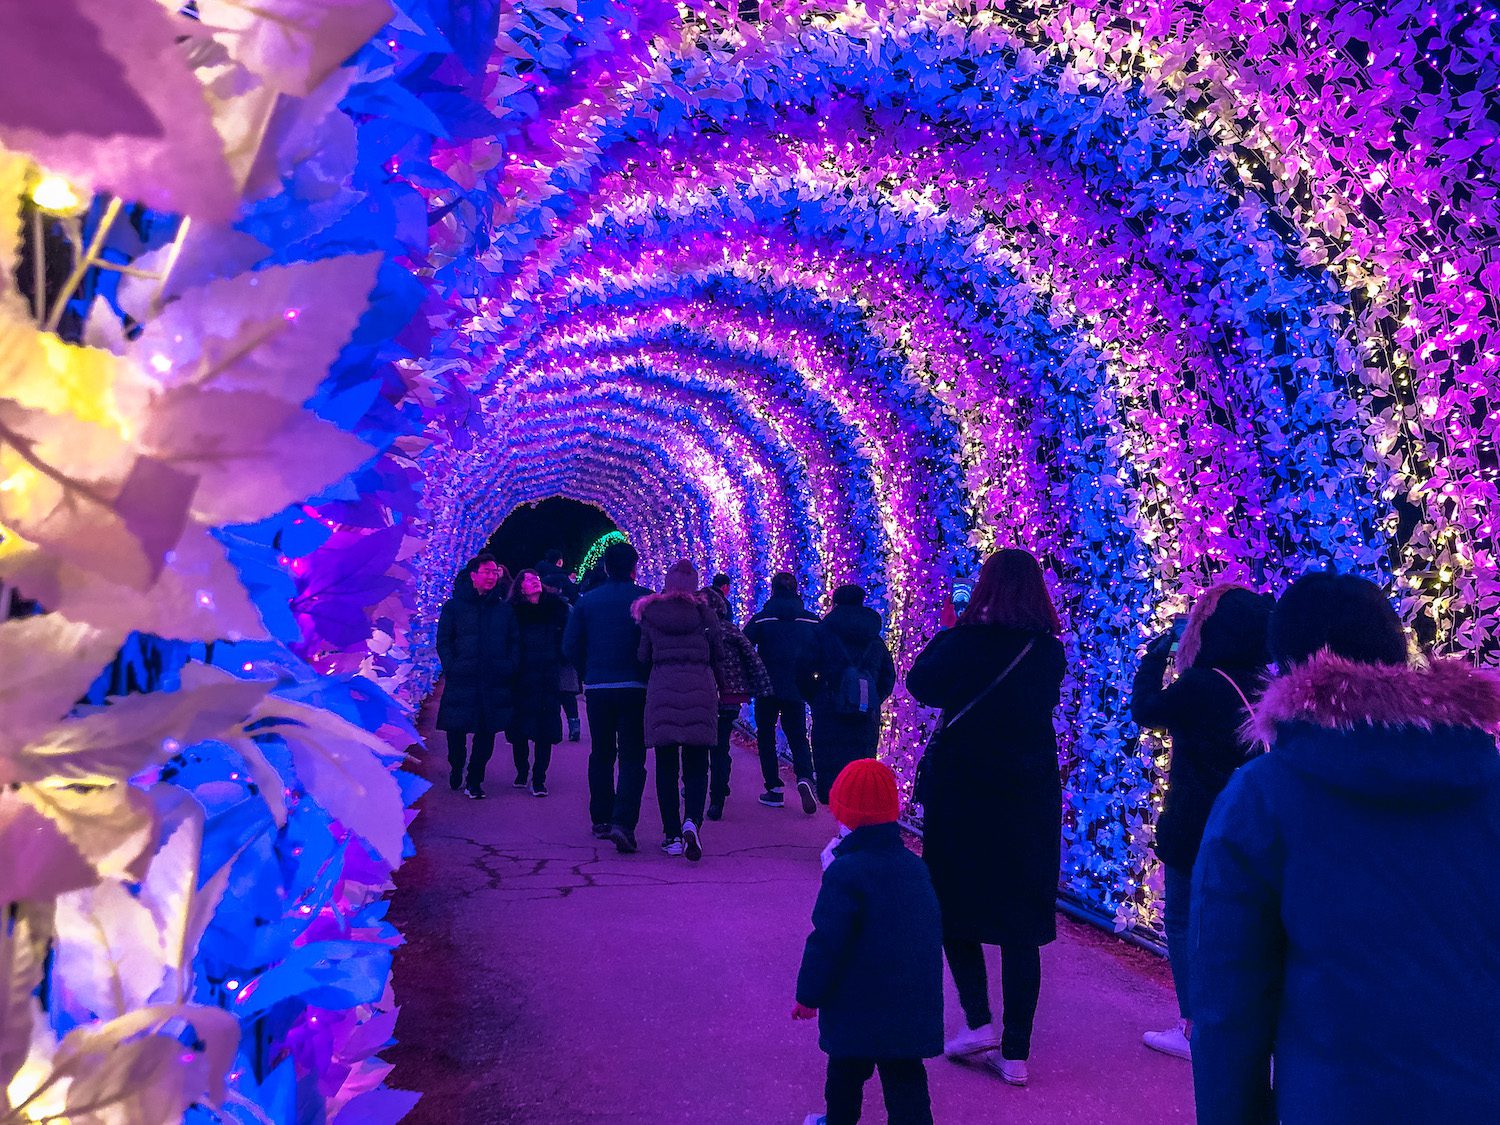 illuminated arched tunnel at the garden of morning calm lighting festival